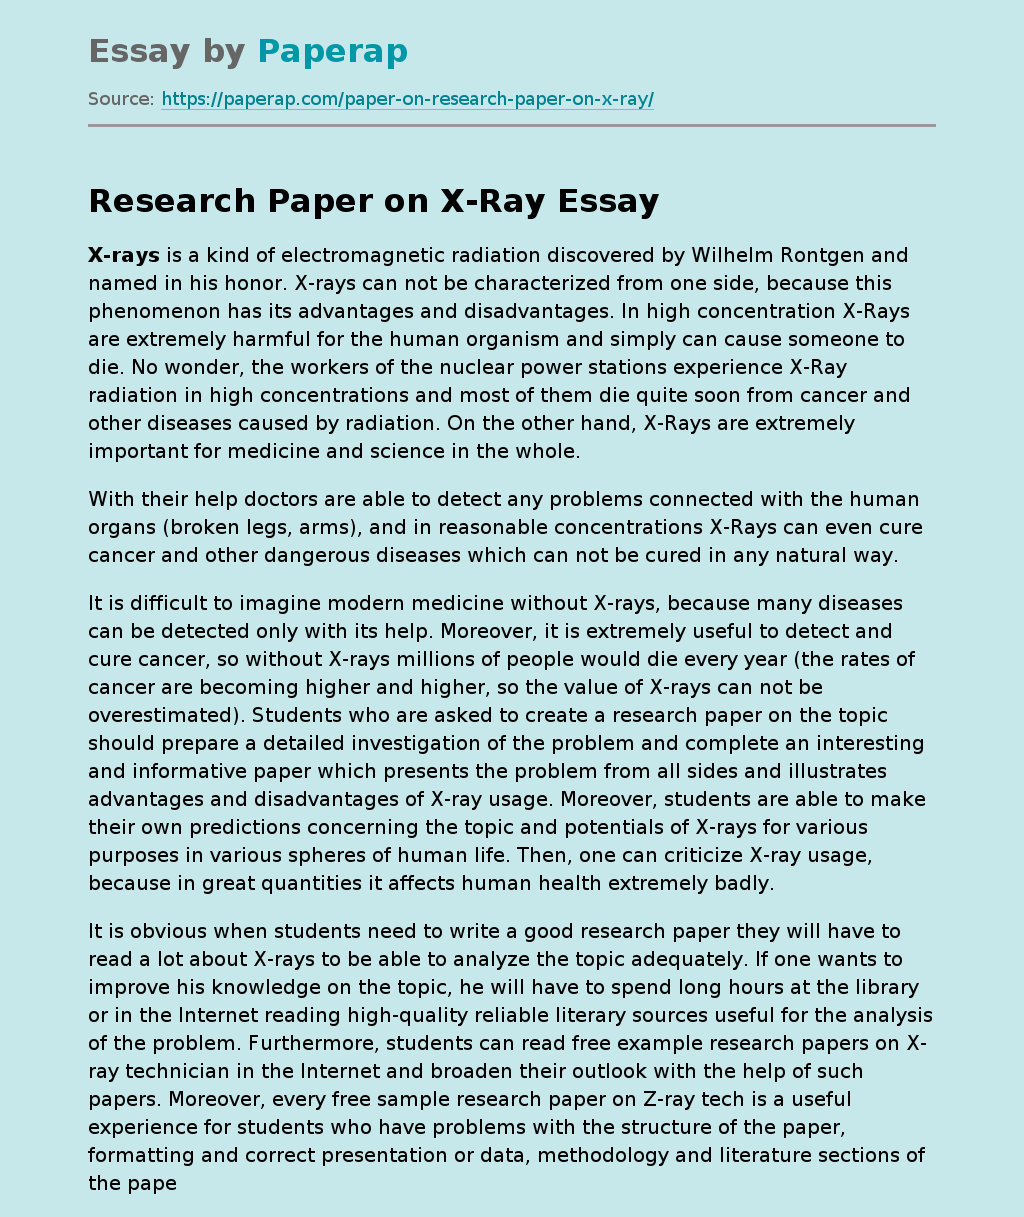 Research Paper on X-Ray